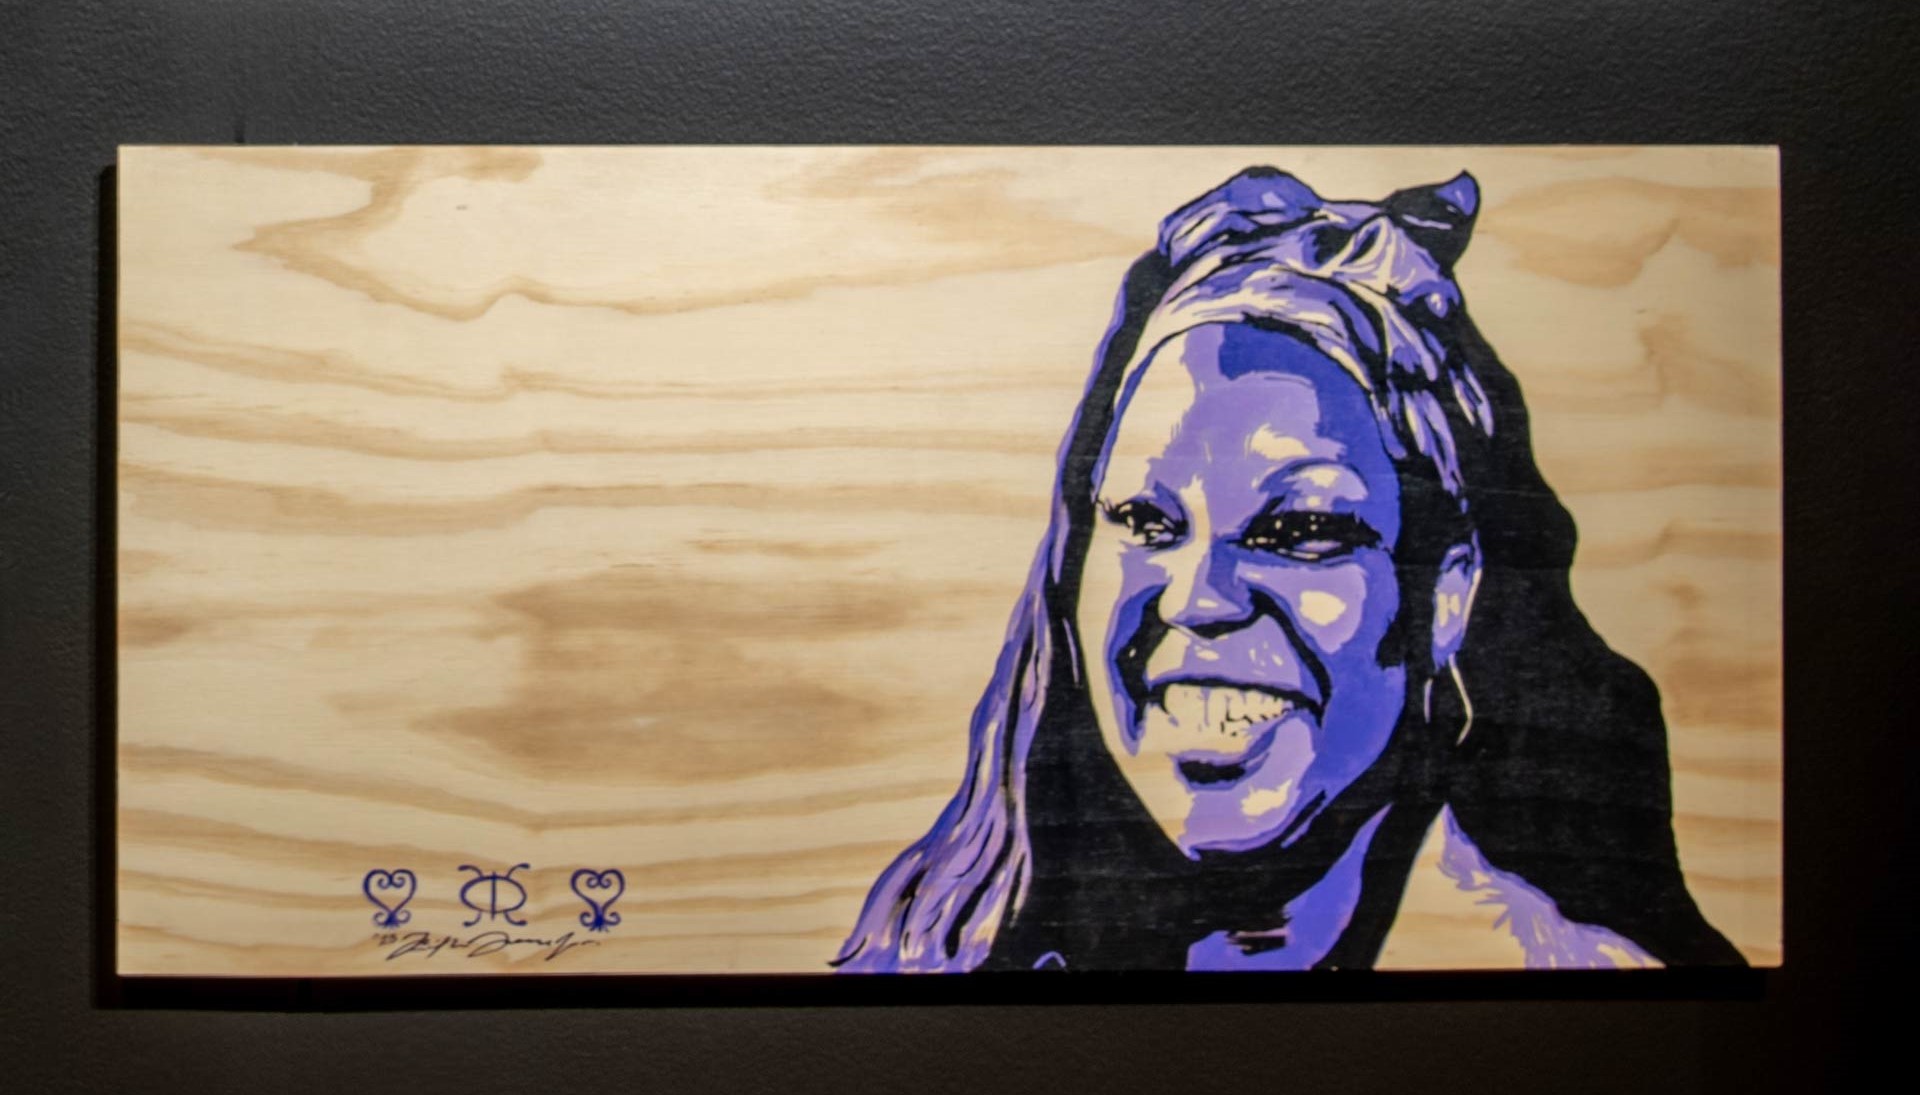 Image of a smiling Black woman with long hair, painted on a wooden plank.